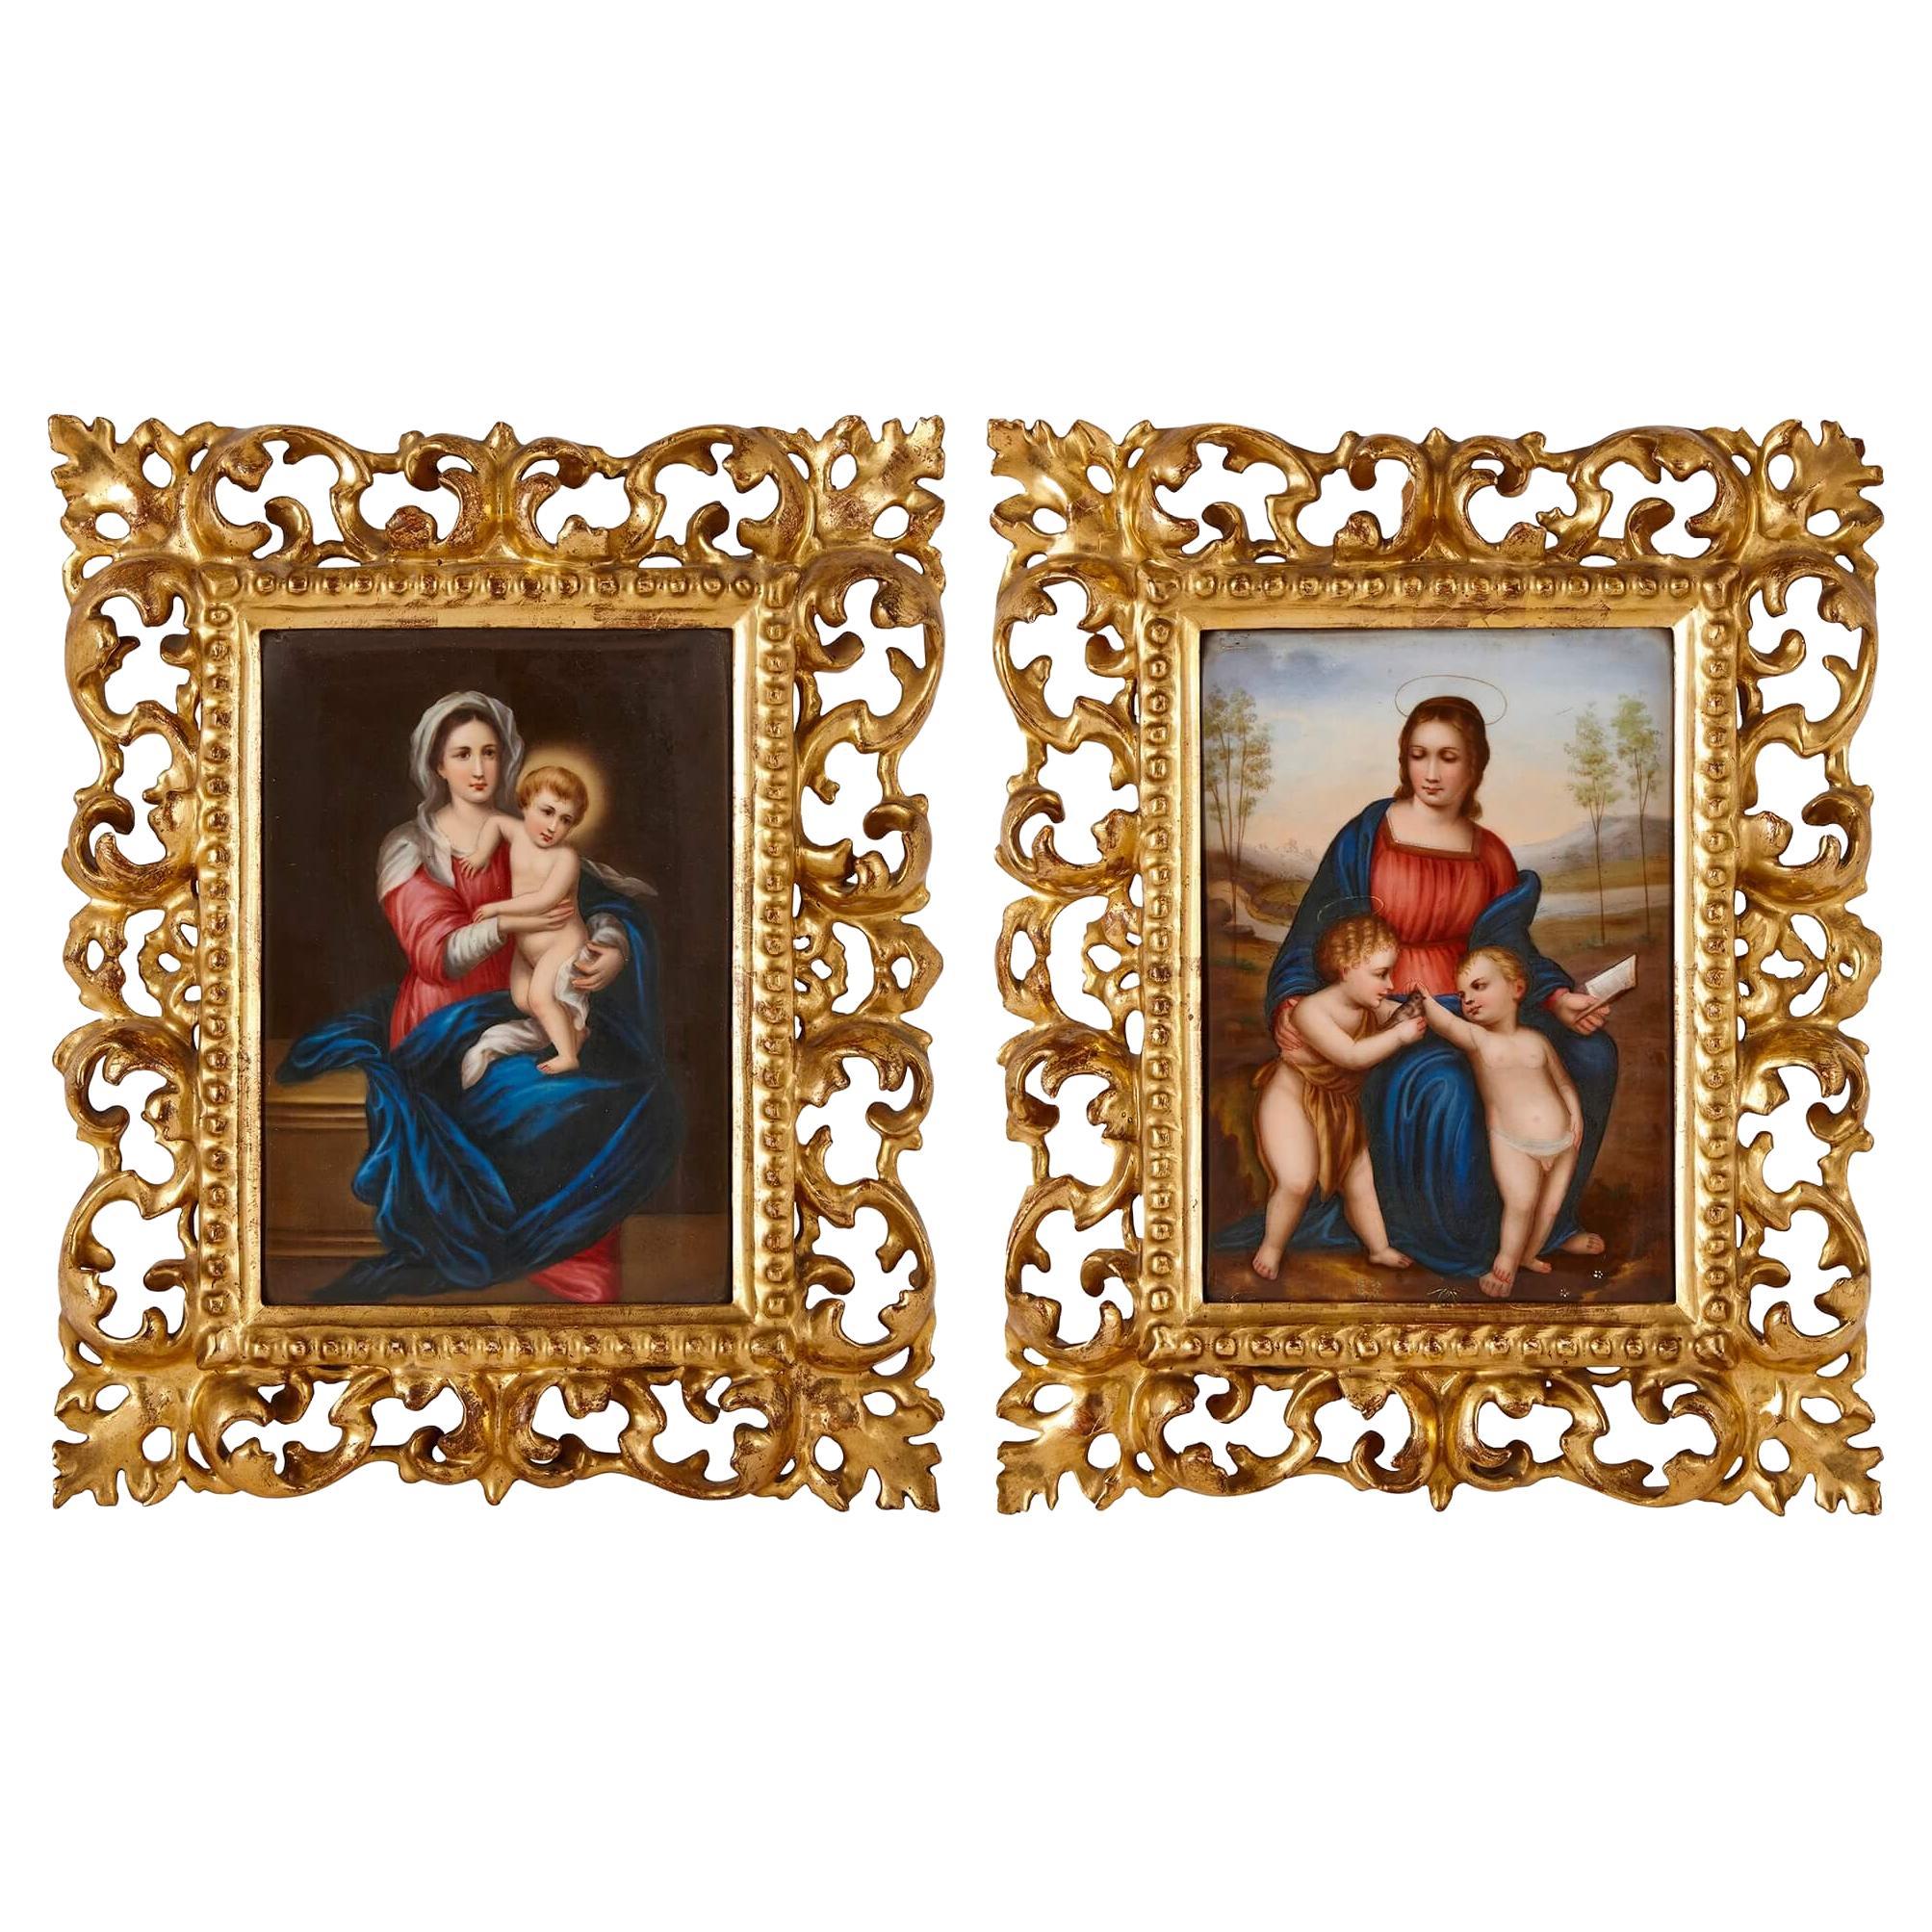 Pair of Porcelain Plaques in Giltwood Frames, After Old Master Madonnas